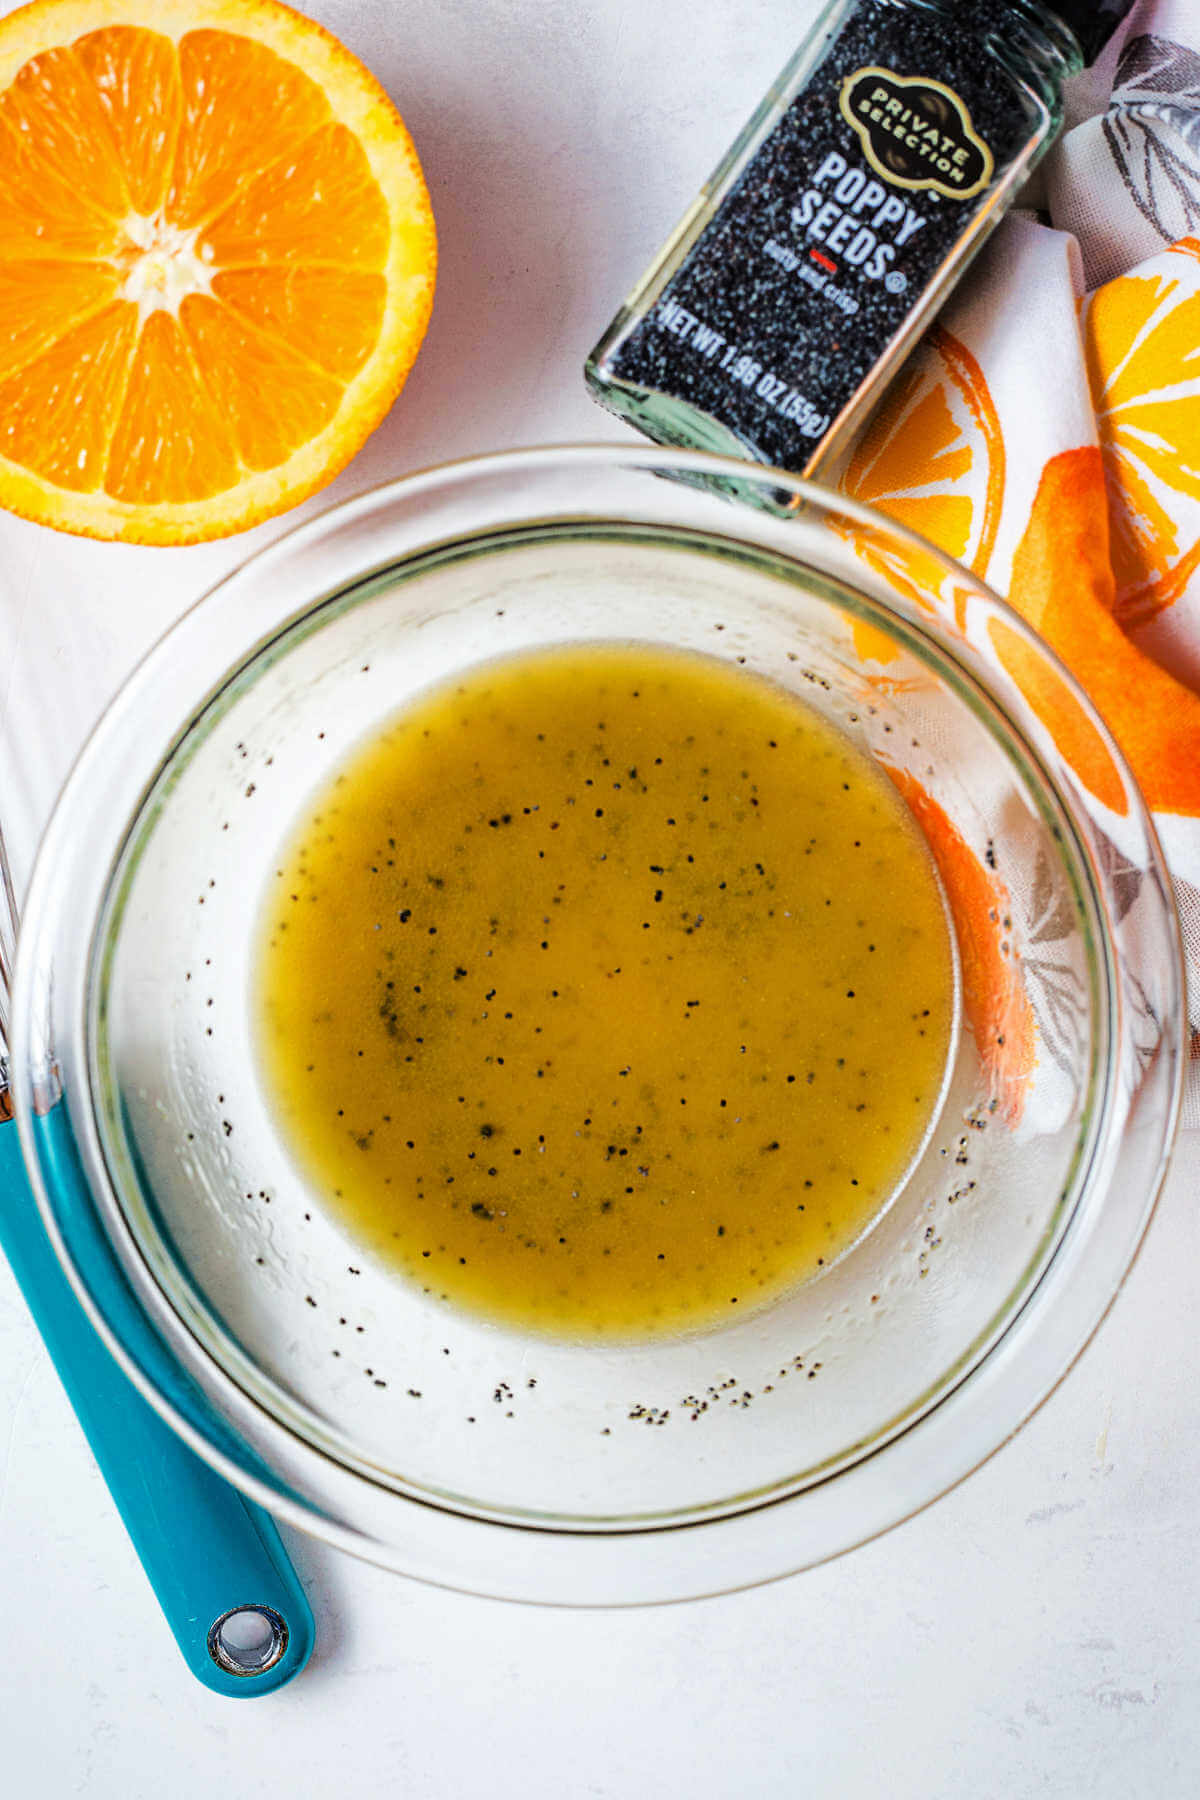 Citrus orange vinaigrette in a glass bowl with a whisk to the side.